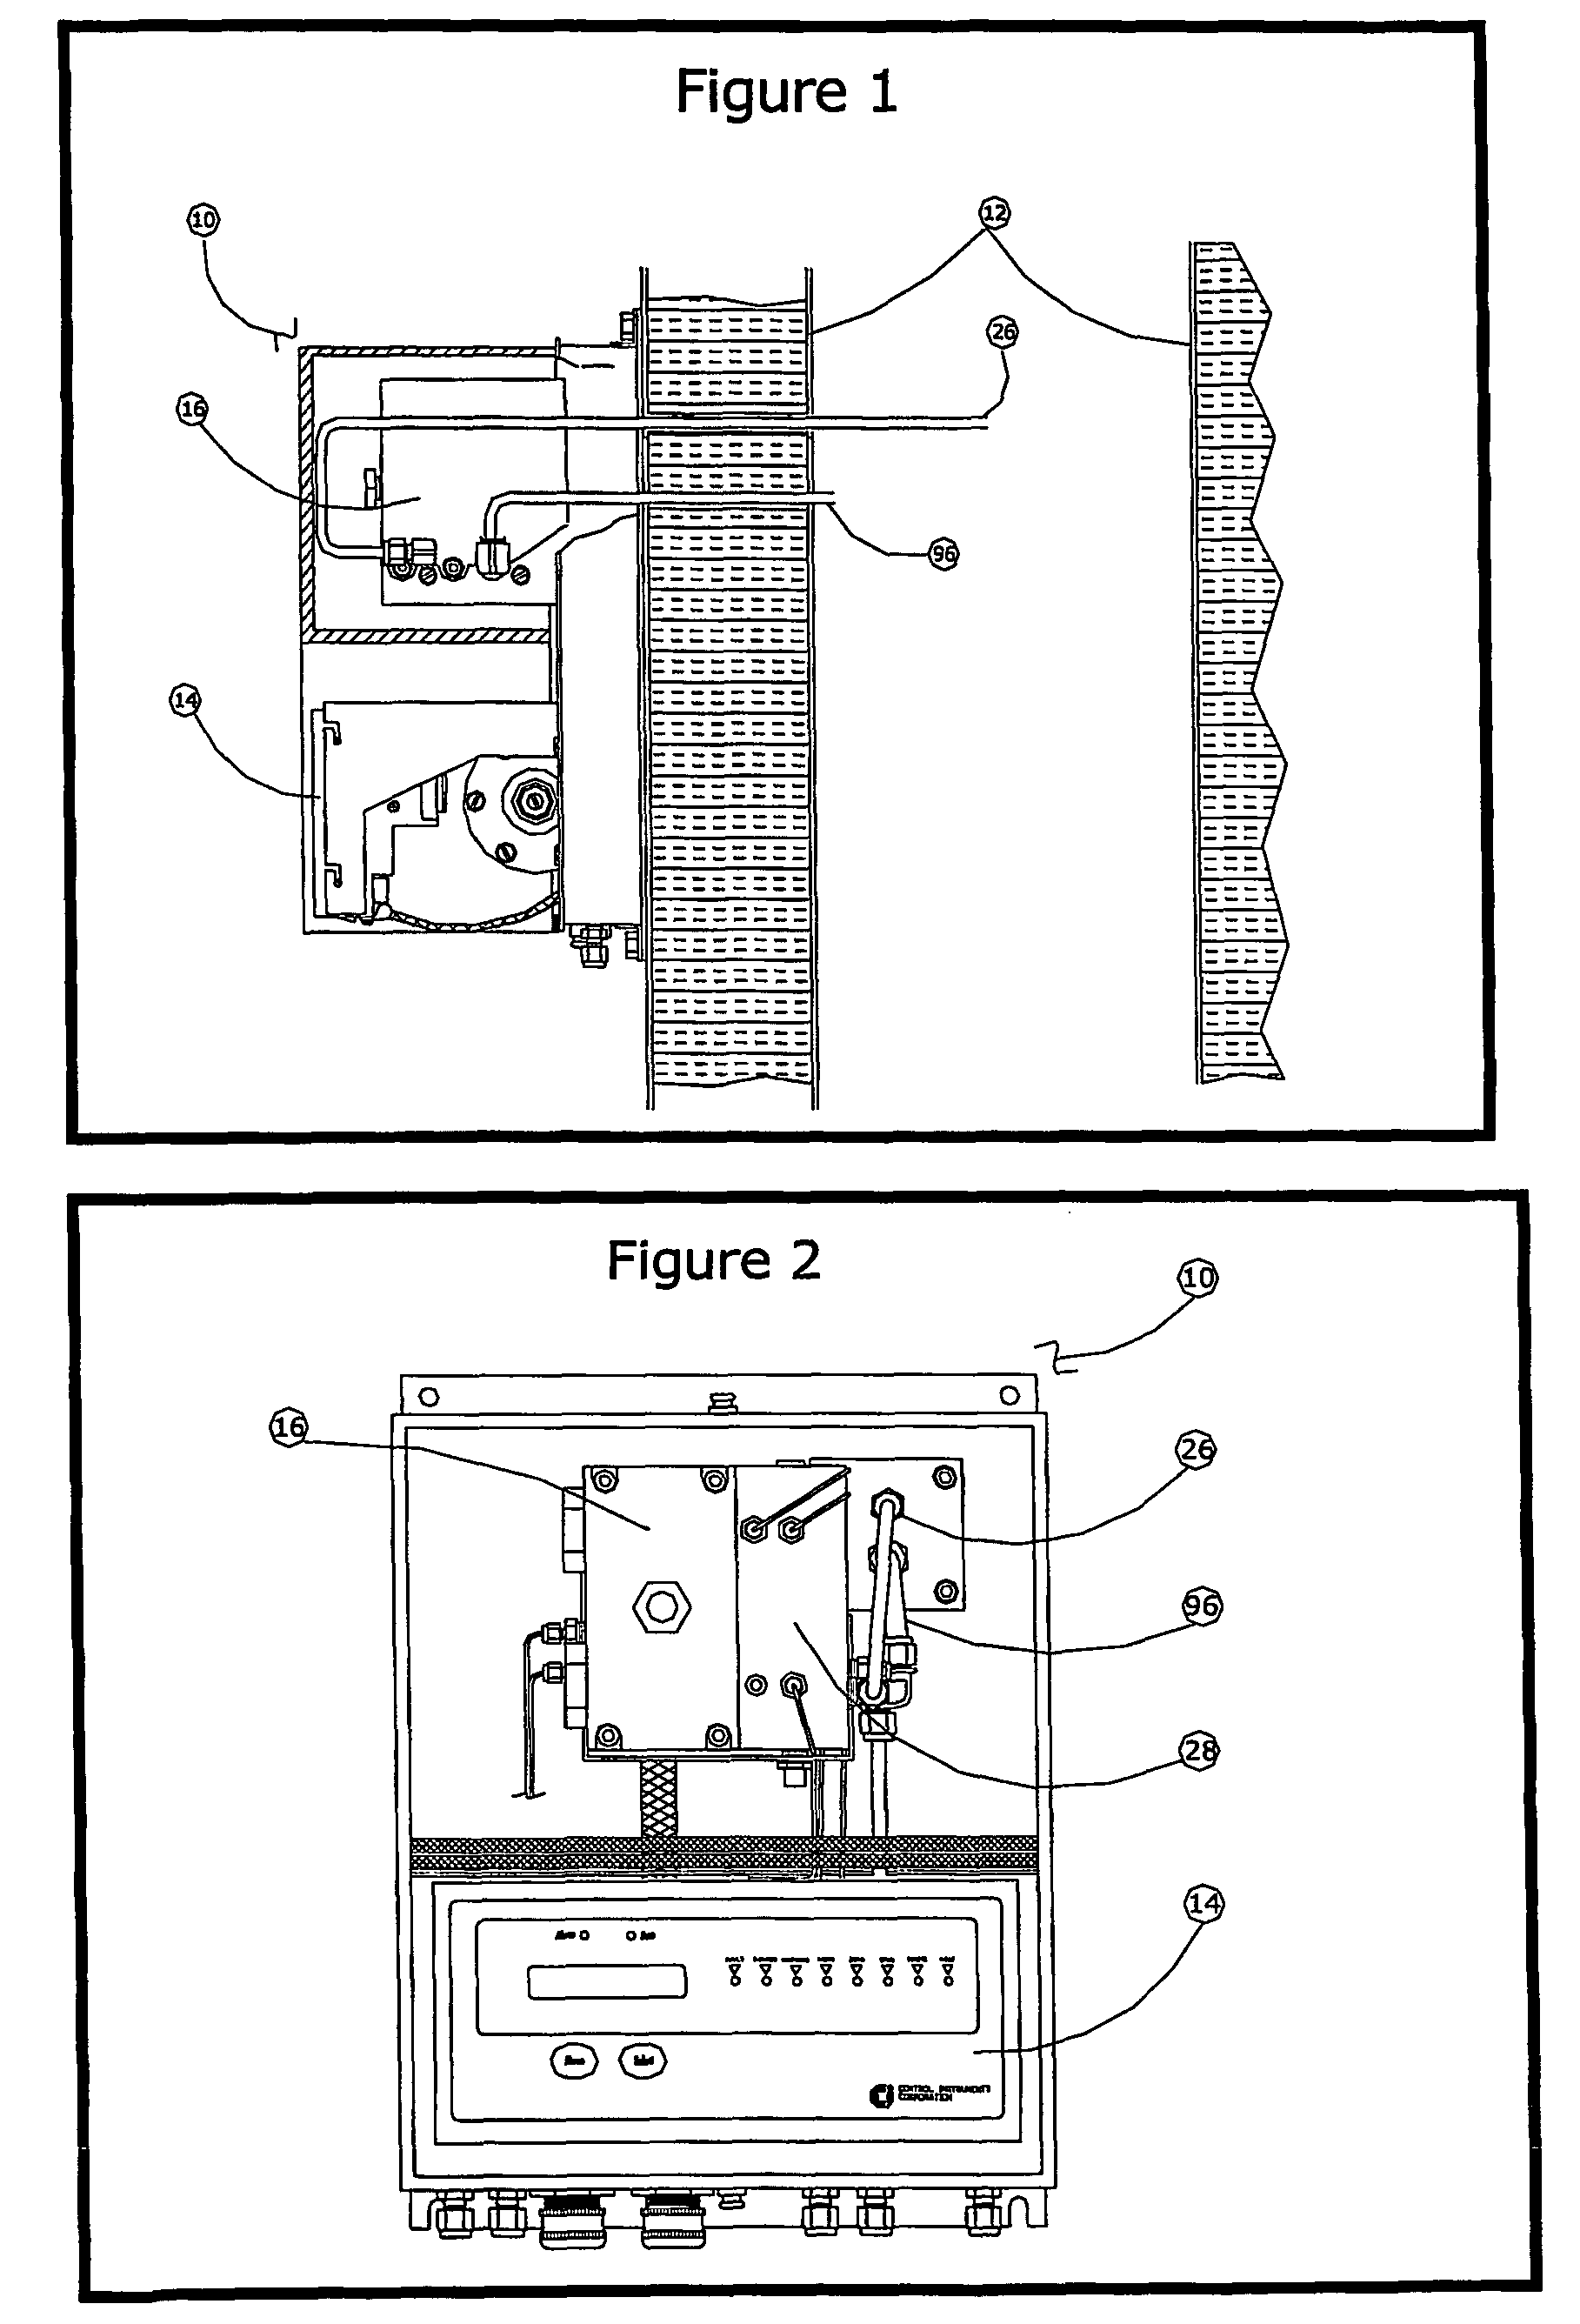 Gas analyzer for measuring the flammability of mixtures of combustible gases and oxygen